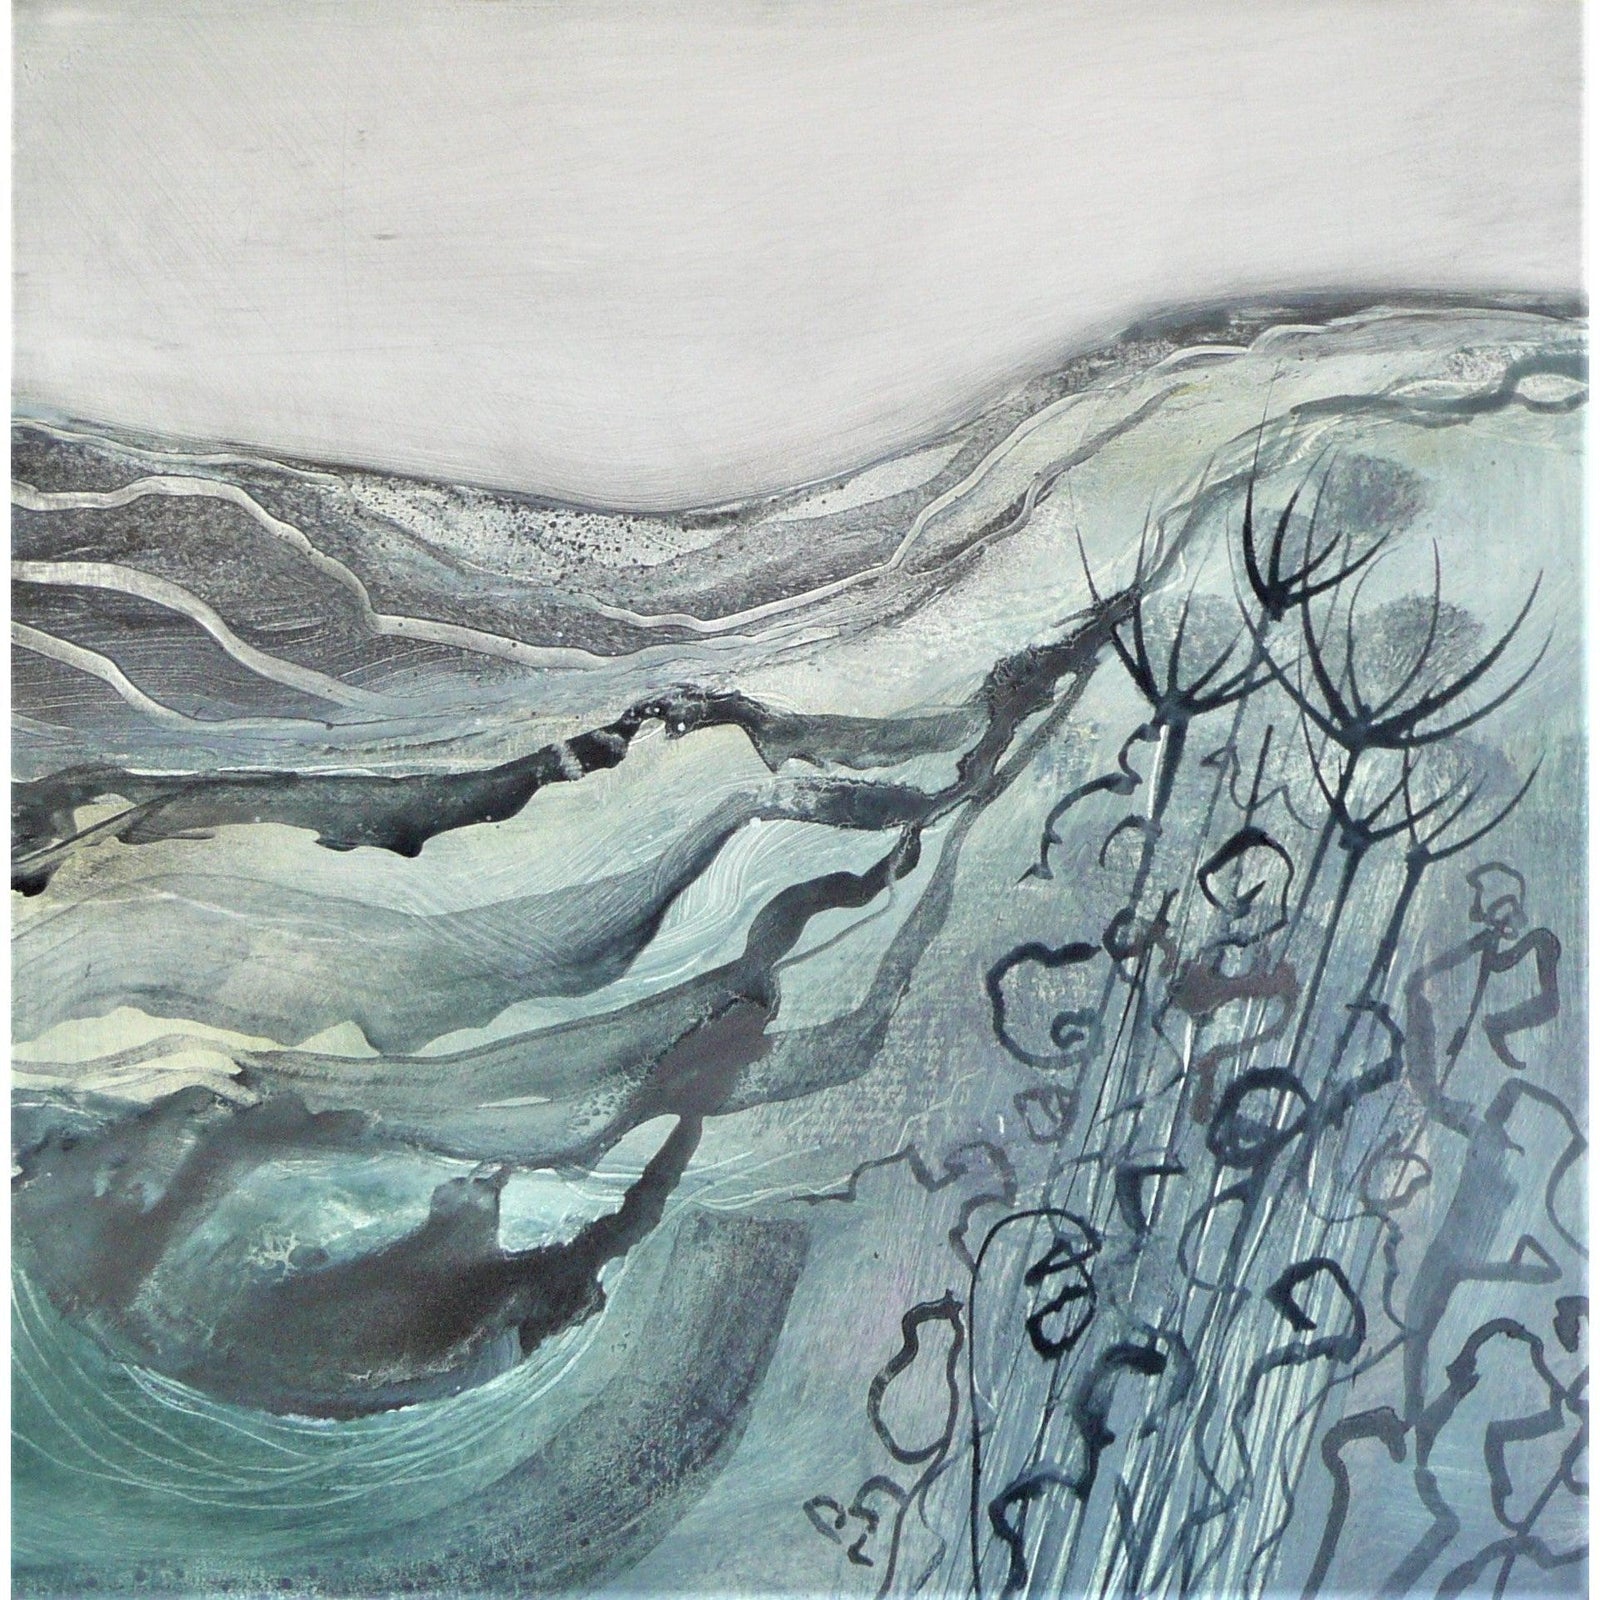 ‘The wind in the fields' oil on wood block by Ruth Taylor, available at Padstow Gallery, Cornwall